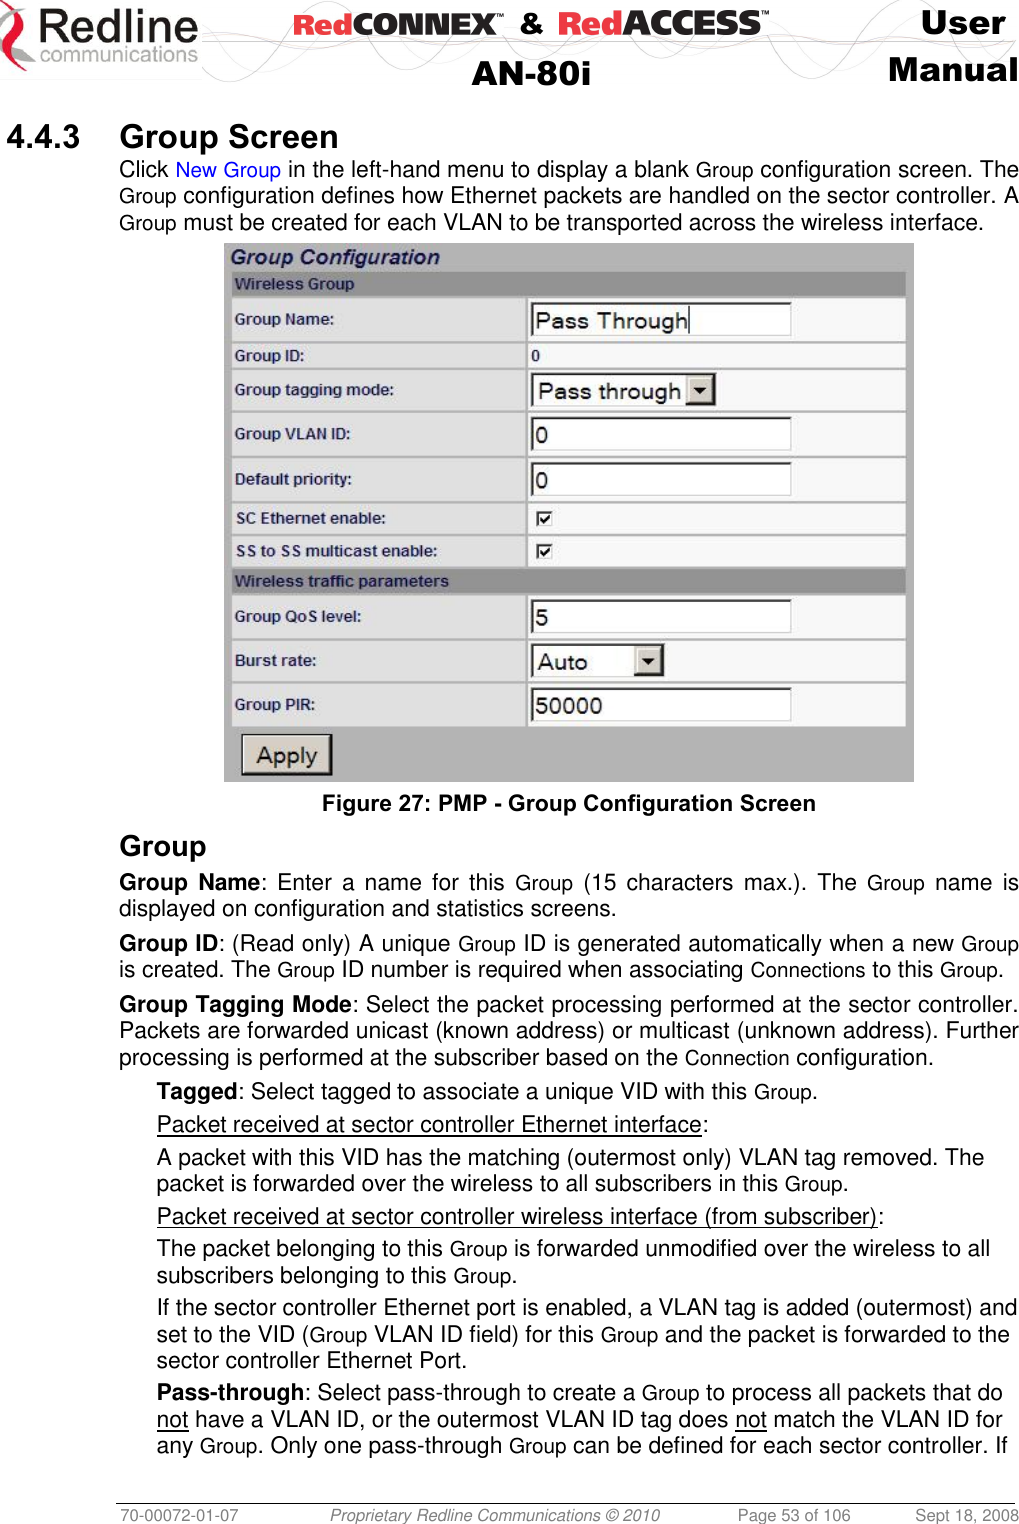    &amp;  User  AN-80i Manual  70-00072-01-07 Proprietary Redline Communications © 2010  Page 53 of 106  Sept 18, 2008  4.4.3 Group Screen Click New Group in the left-hand menu to display a blank Group configuration screen. The Group configuration defines how Ethernet packets are handled on the sector controller. A Group must be created for each VLAN to be transported across the wireless interface.  Figure 27: PMP - Group Configuration Screen  Group Group  Name:  Enter  a name for  this  Group  (15  characters  max.). The Group  name  is displayed on configuration and statistics screens. Group ID: (Read only) A unique Group ID is generated automatically when a new Group is created. The Group ID number is required when associating Connections to this Group. Group Tagging Mode: Select the packet processing performed at the sector controller. Packets are forwarded unicast (known address) or multicast (unknown address). Further processing is performed at the subscriber based on the Connection configuration. Tagged: Select tagged to associate a unique VID with this Group. Packet received at sector controller Ethernet interface: A packet with this VID has the matching (outermost only) VLAN tag removed. The packet is forwarded over the wireless to all subscribers in this Group. Packet received at sector controller wireless interface (from subscriber): The packet belonging to this Group is forwarded unmodified over the wireless to all subscribers belonging to this Group.  If the sector controller Ethernet port is enabled, a VLAN tag is added (outermost) and set to the VID (Group VLAN ID field) for this Group and the packet is forwarded to the sector controller Ethernet Port. Pass-through: Select pass-through to create a Group to process all packets that do not have a VLAN ID, or the outermost VLAN ID tag does not match the VLAN ID for any Group. Only one pass-through Group can be defined for each sector controller. If 